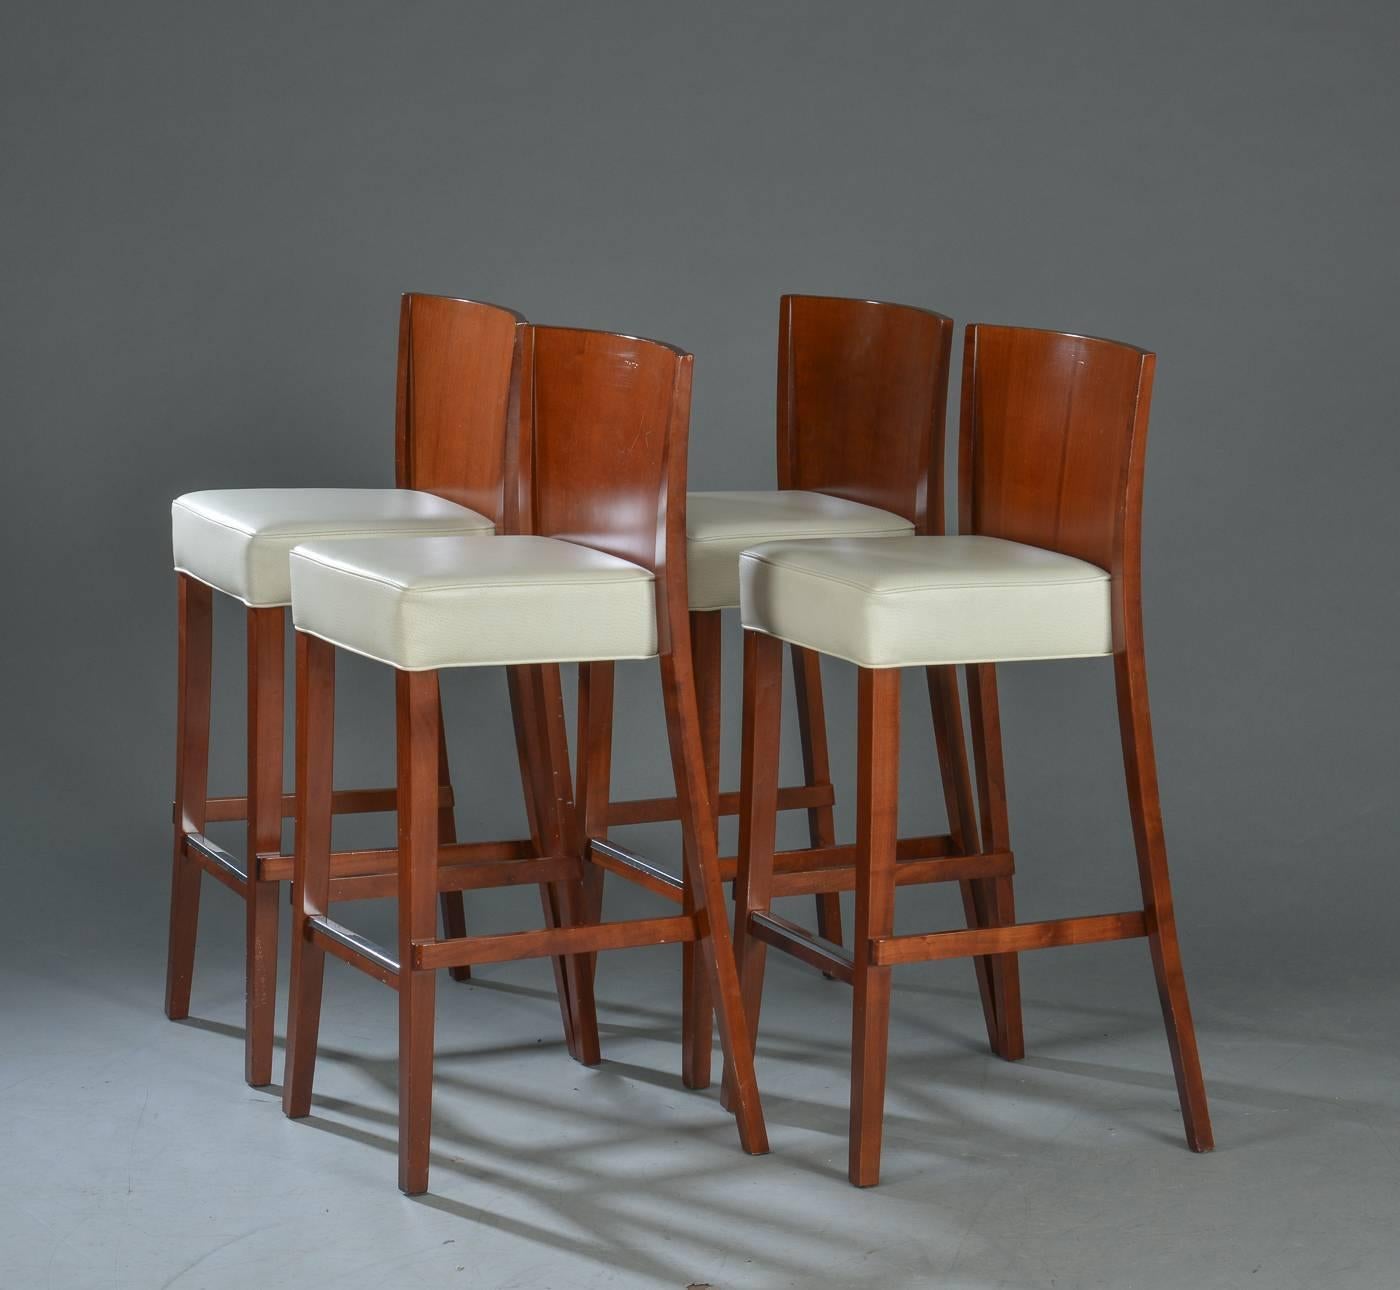 Philippe Starck for Driade. Four bar stools from the series 'Neoz' with lacquered wooden frames and seats covered with white leather. Measure: SH. 75 cm
Up to four available.